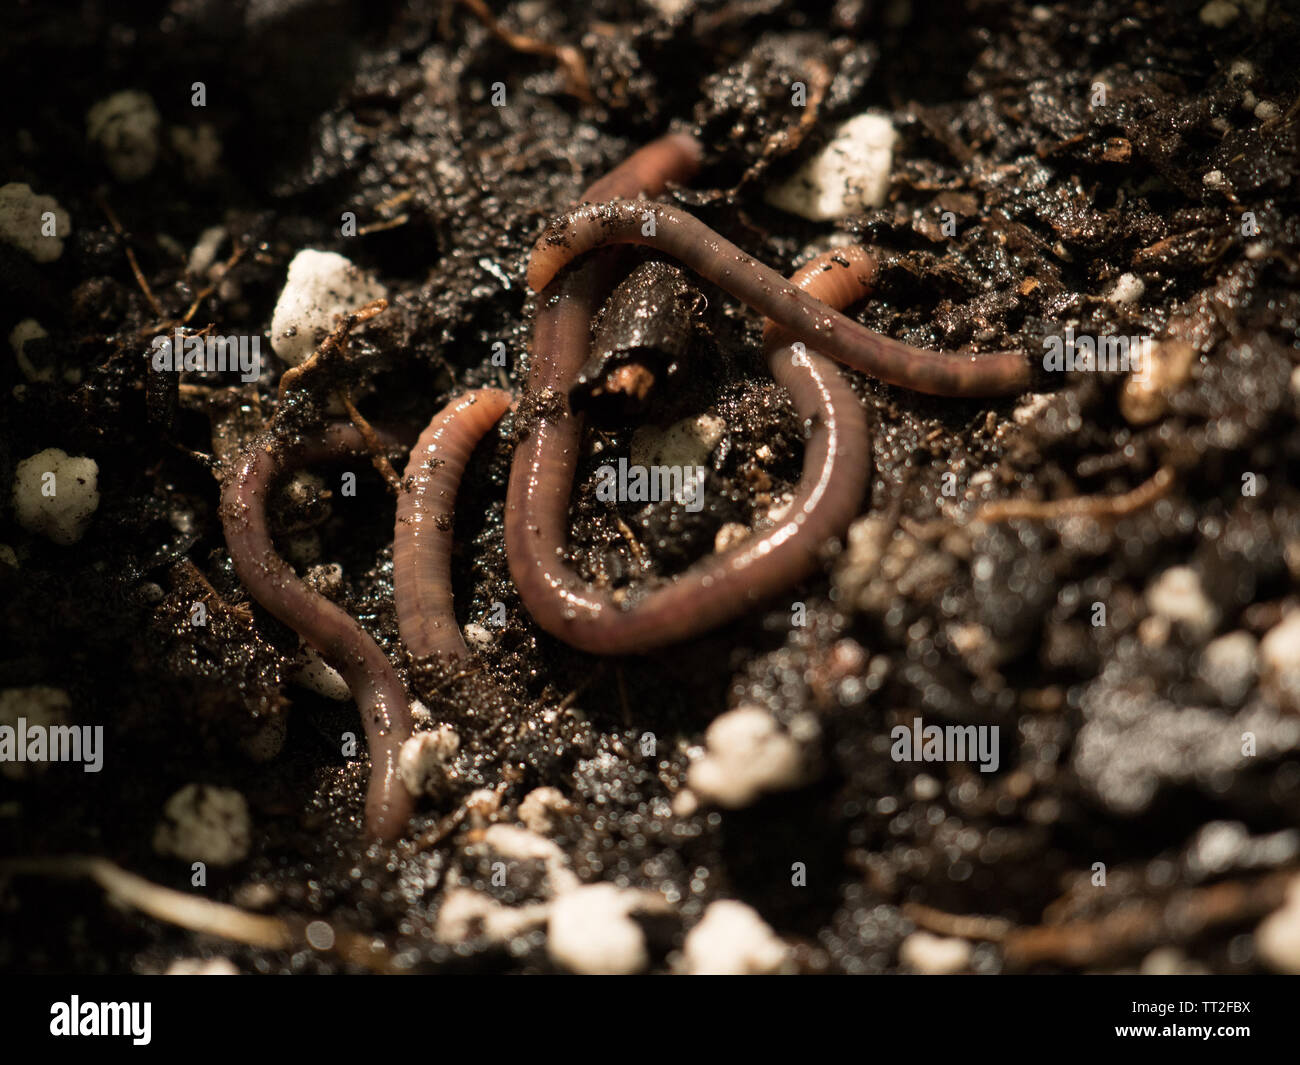 Earthworm digging in the dirt Stock Photo